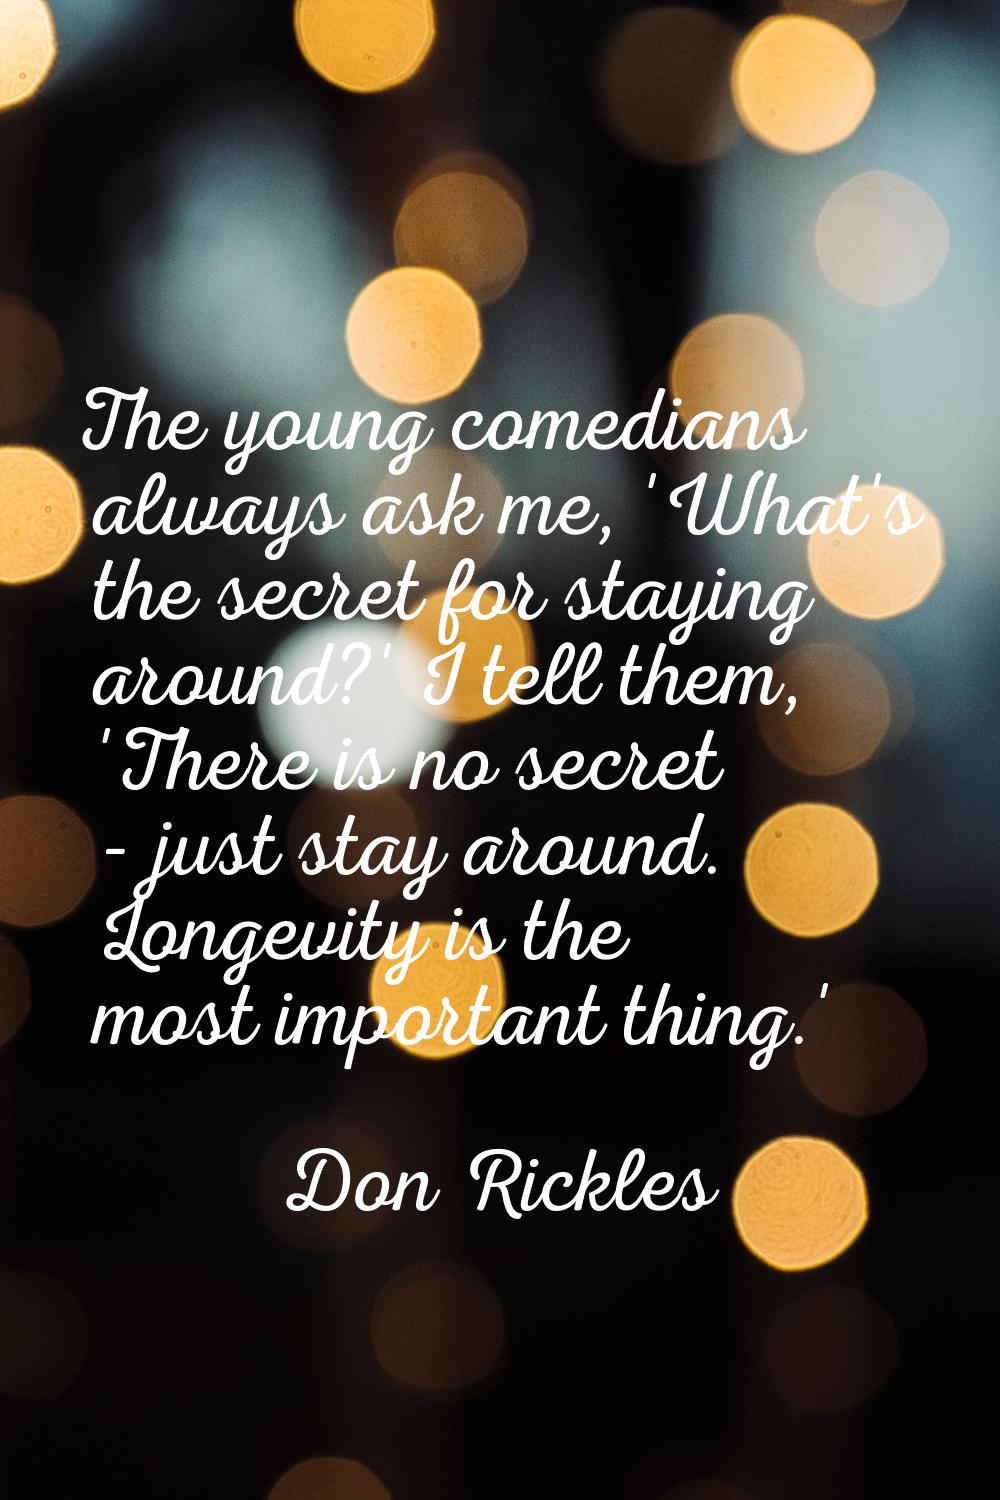 The young comedians always ask me, 'What's the secret for staying around?' I tell them, 'There is n